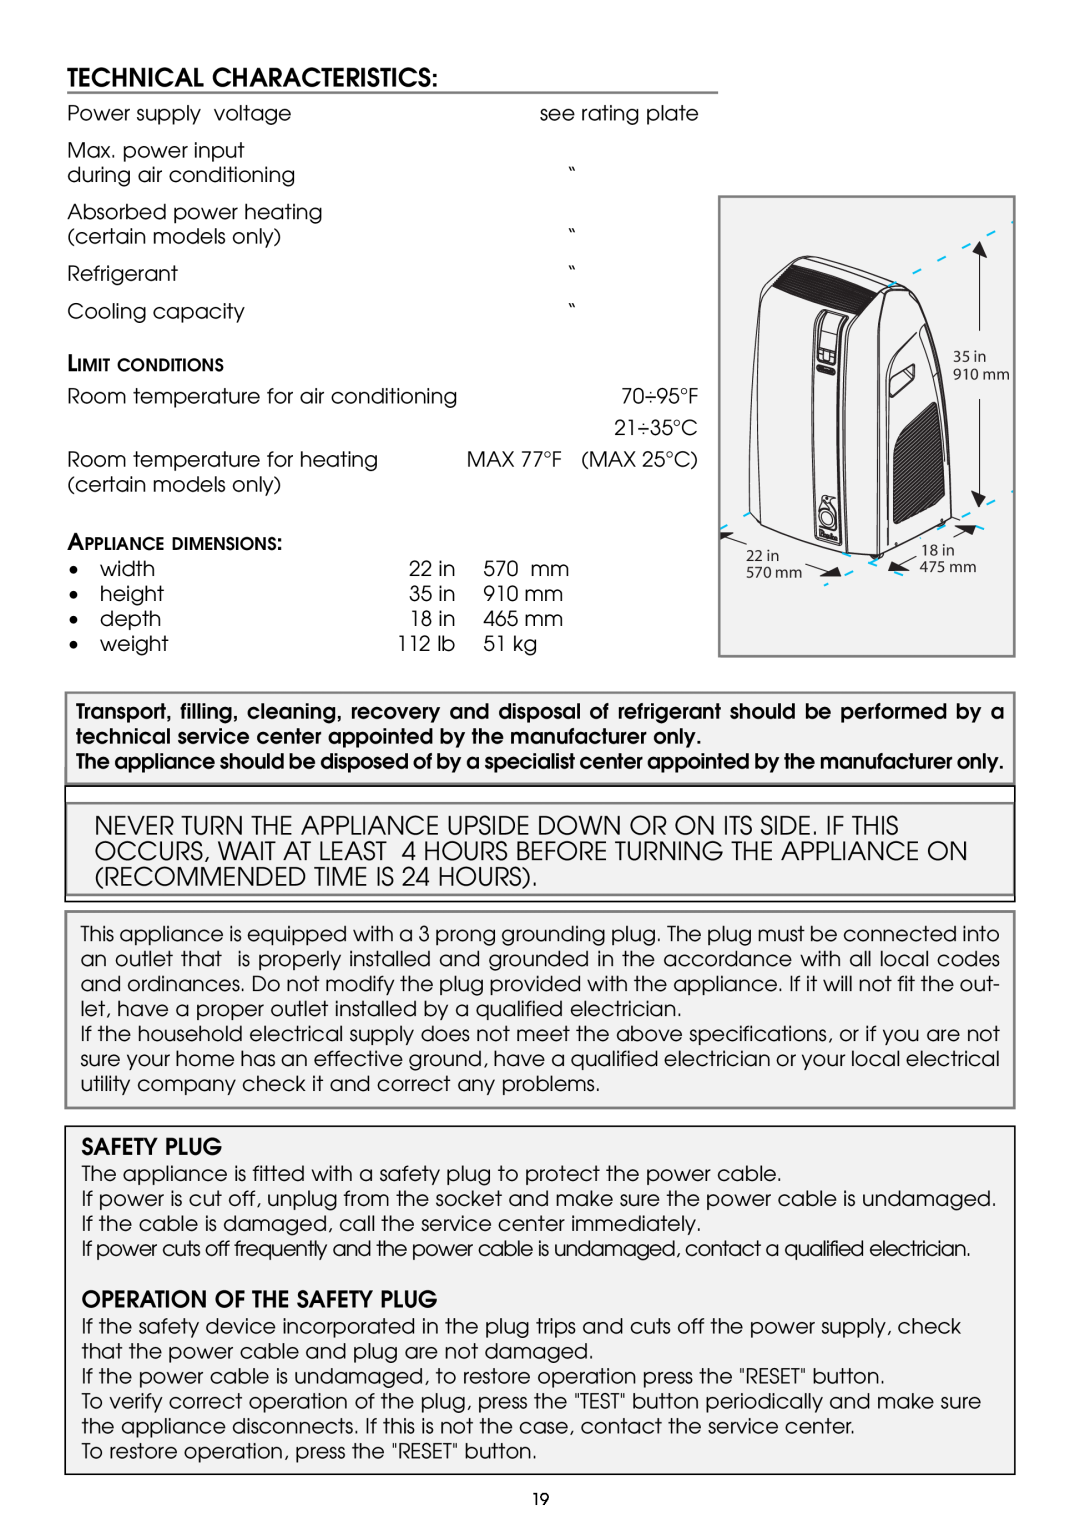 DeLonghi PAC W130E specifications Technical Characteristics, Operation Of The Safety Plug 